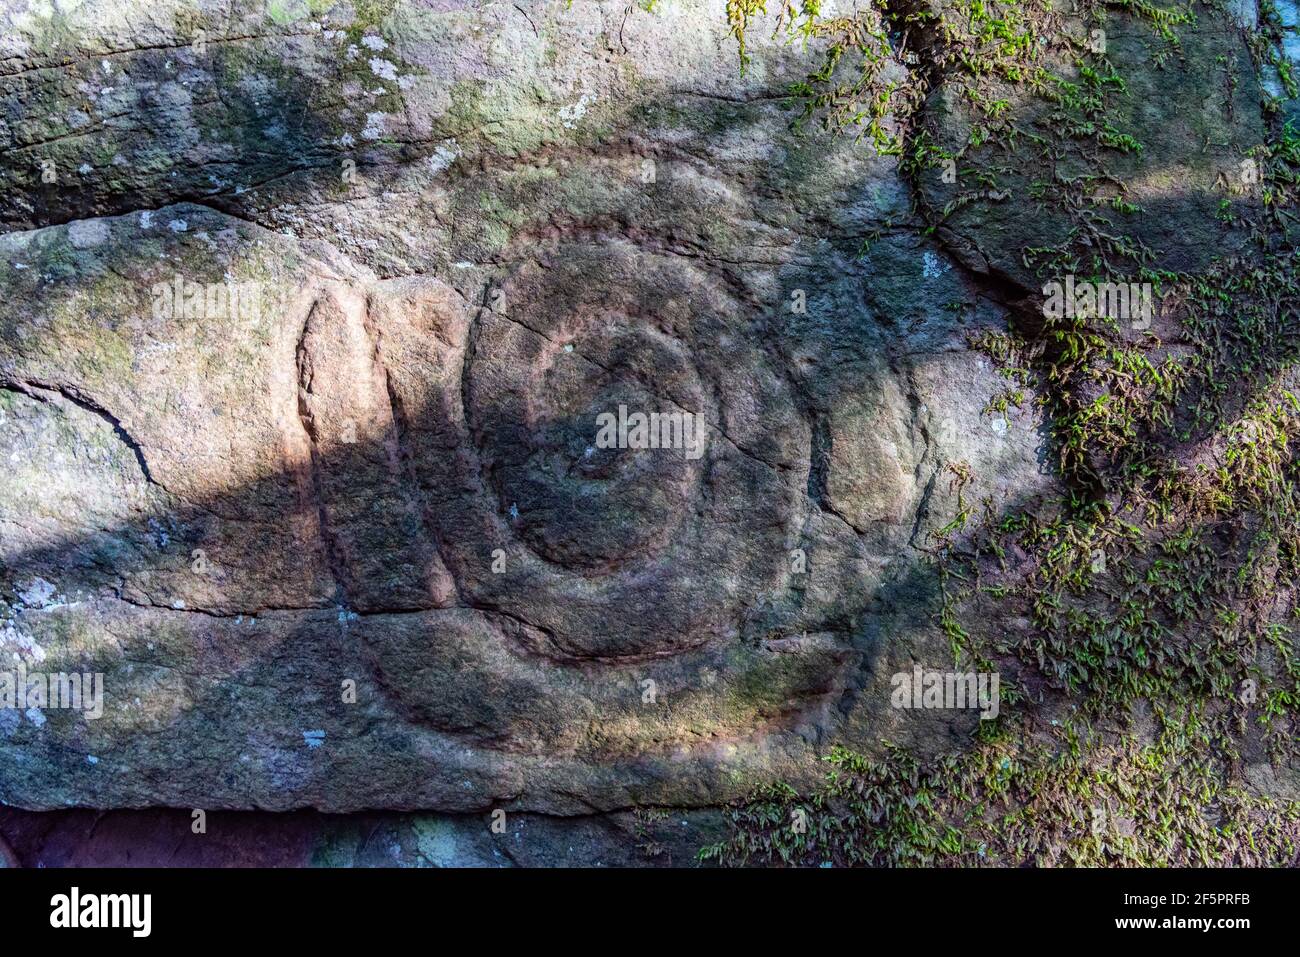 Stone engravements made by indigenous people at La Zarza cultural park, La Palma, Canary islands, Spain. Stock Photo